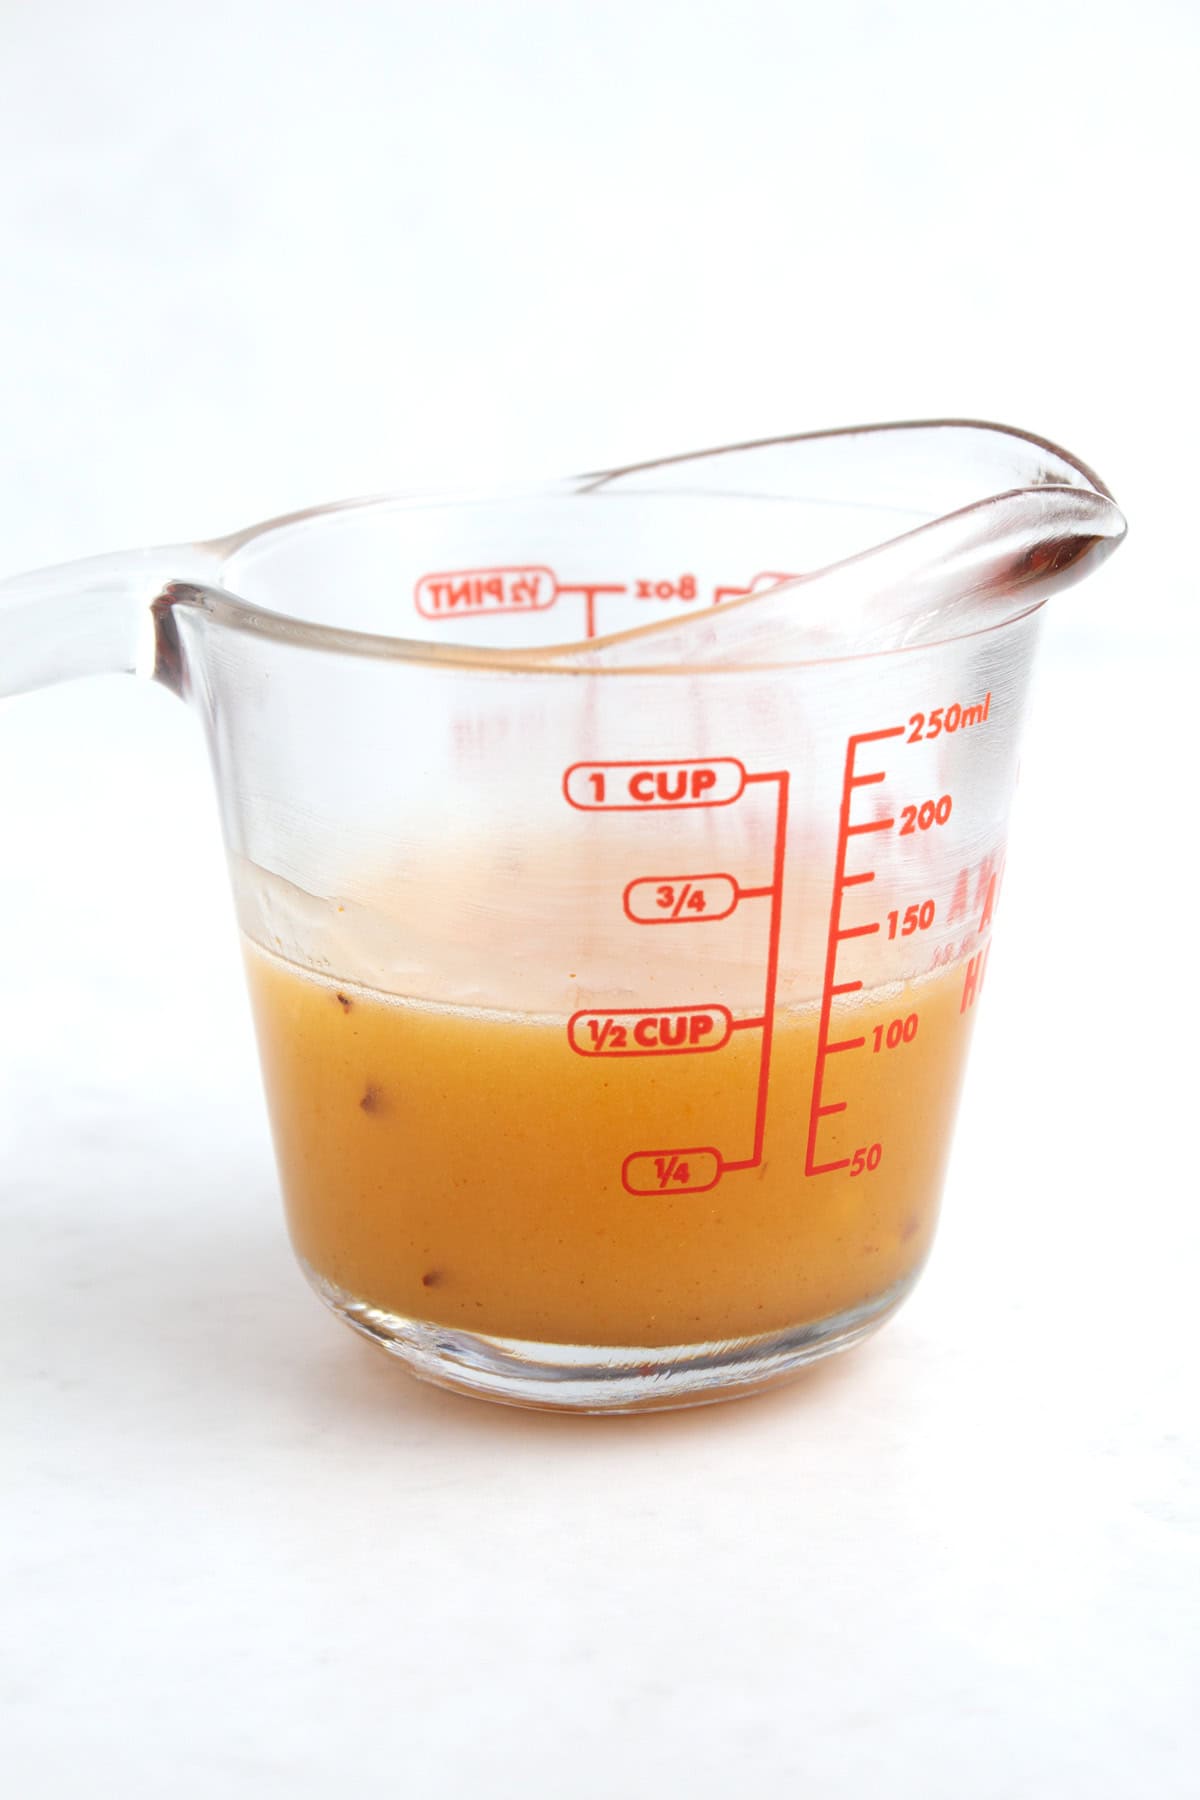 A 1 cup glass measuring container with melted honey, butter, and spices mixed together.